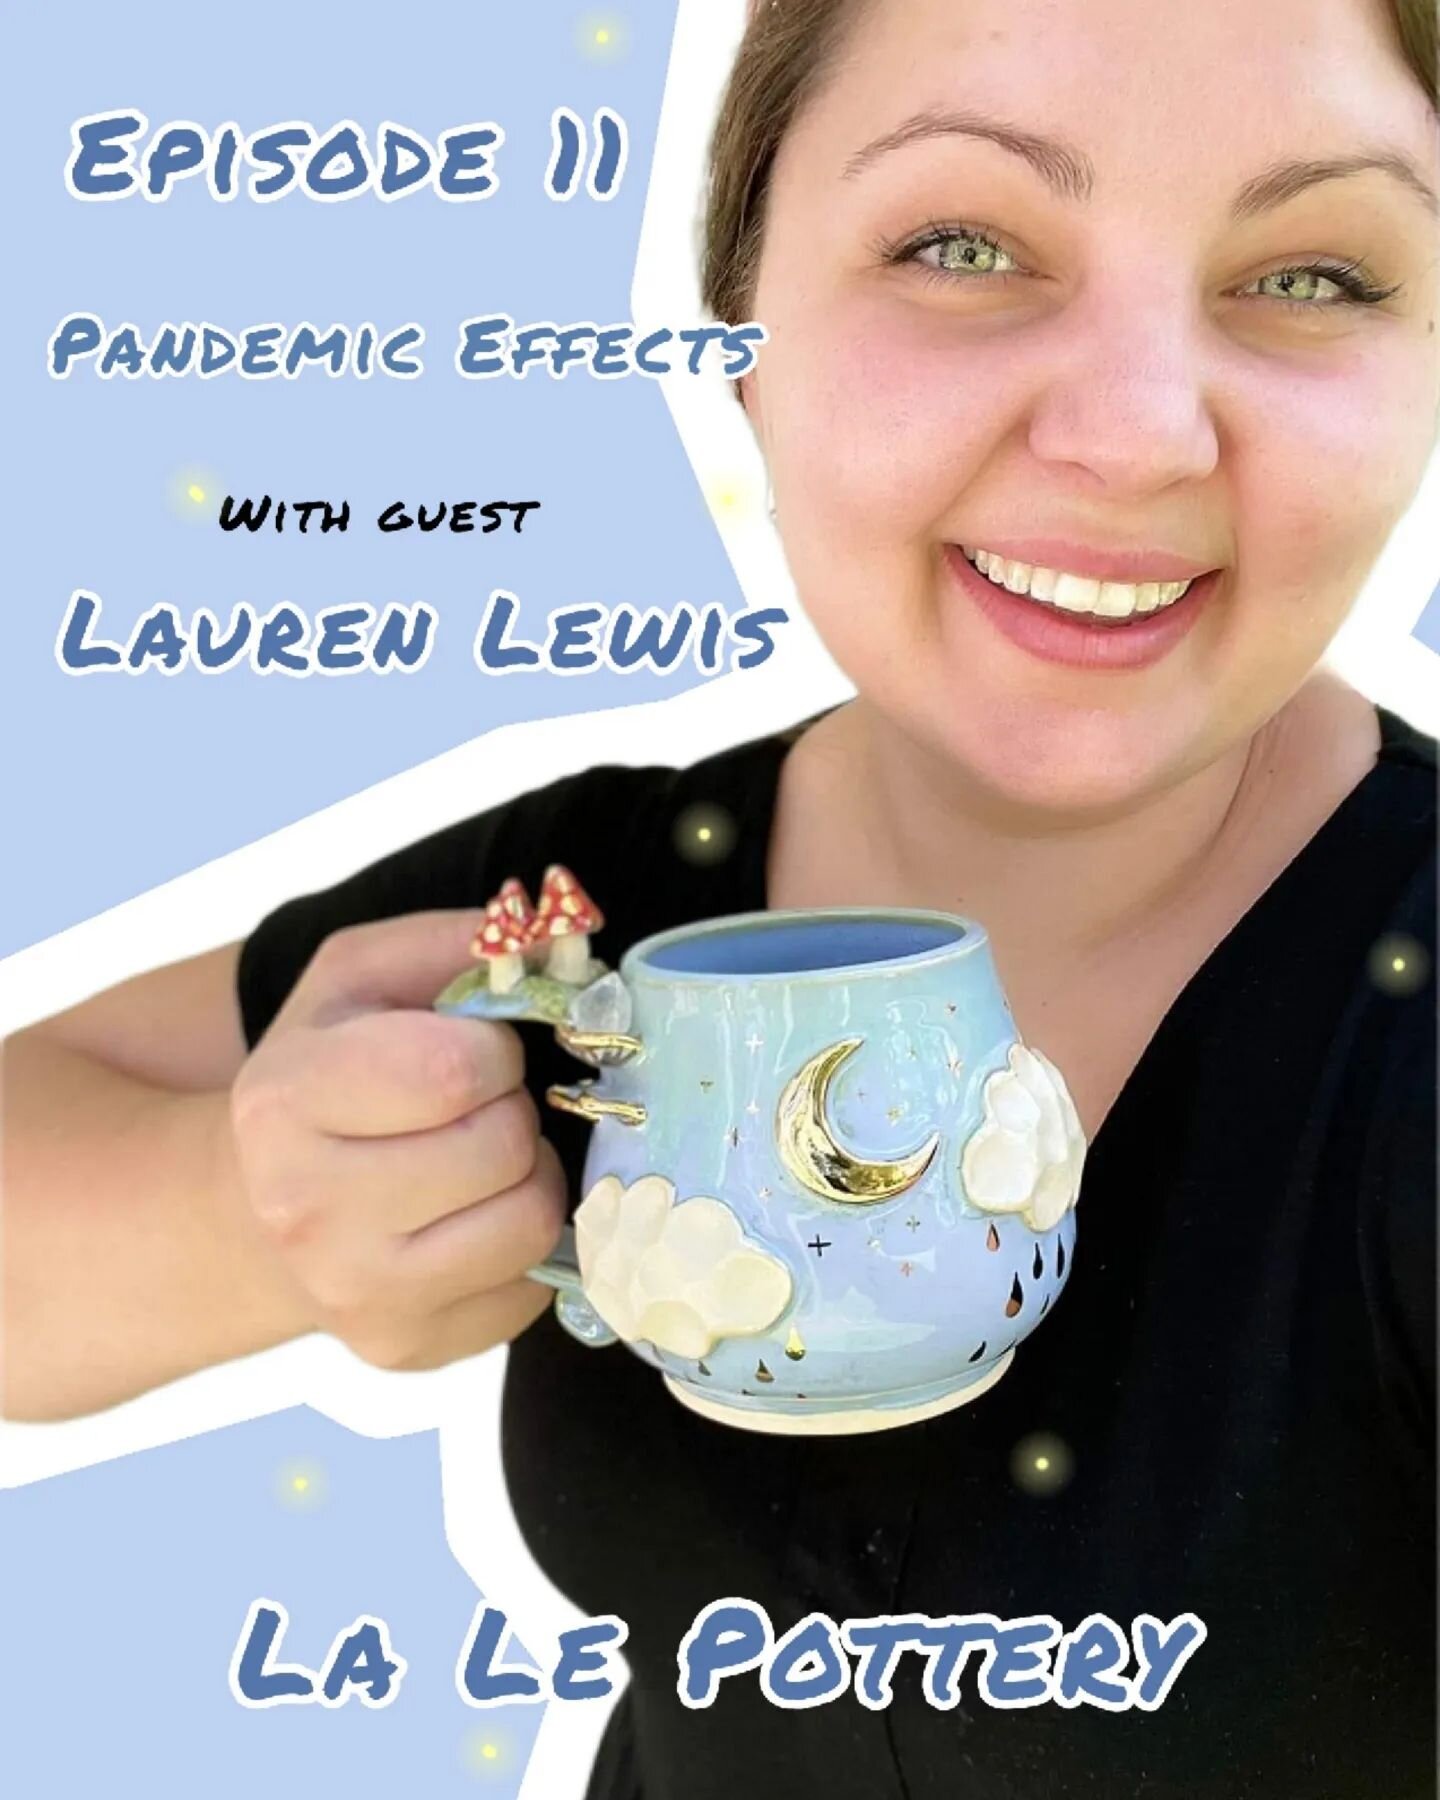 ✨️New epsiode!✨️ Pandemic Effects, featuring Lauren Lewis @lalepottery 

On this episode we chat about how the pandemic has had significant impacts on our businesses in both negative and positive light.

Listen on Spotify or Anchor 

#ceramics #potte